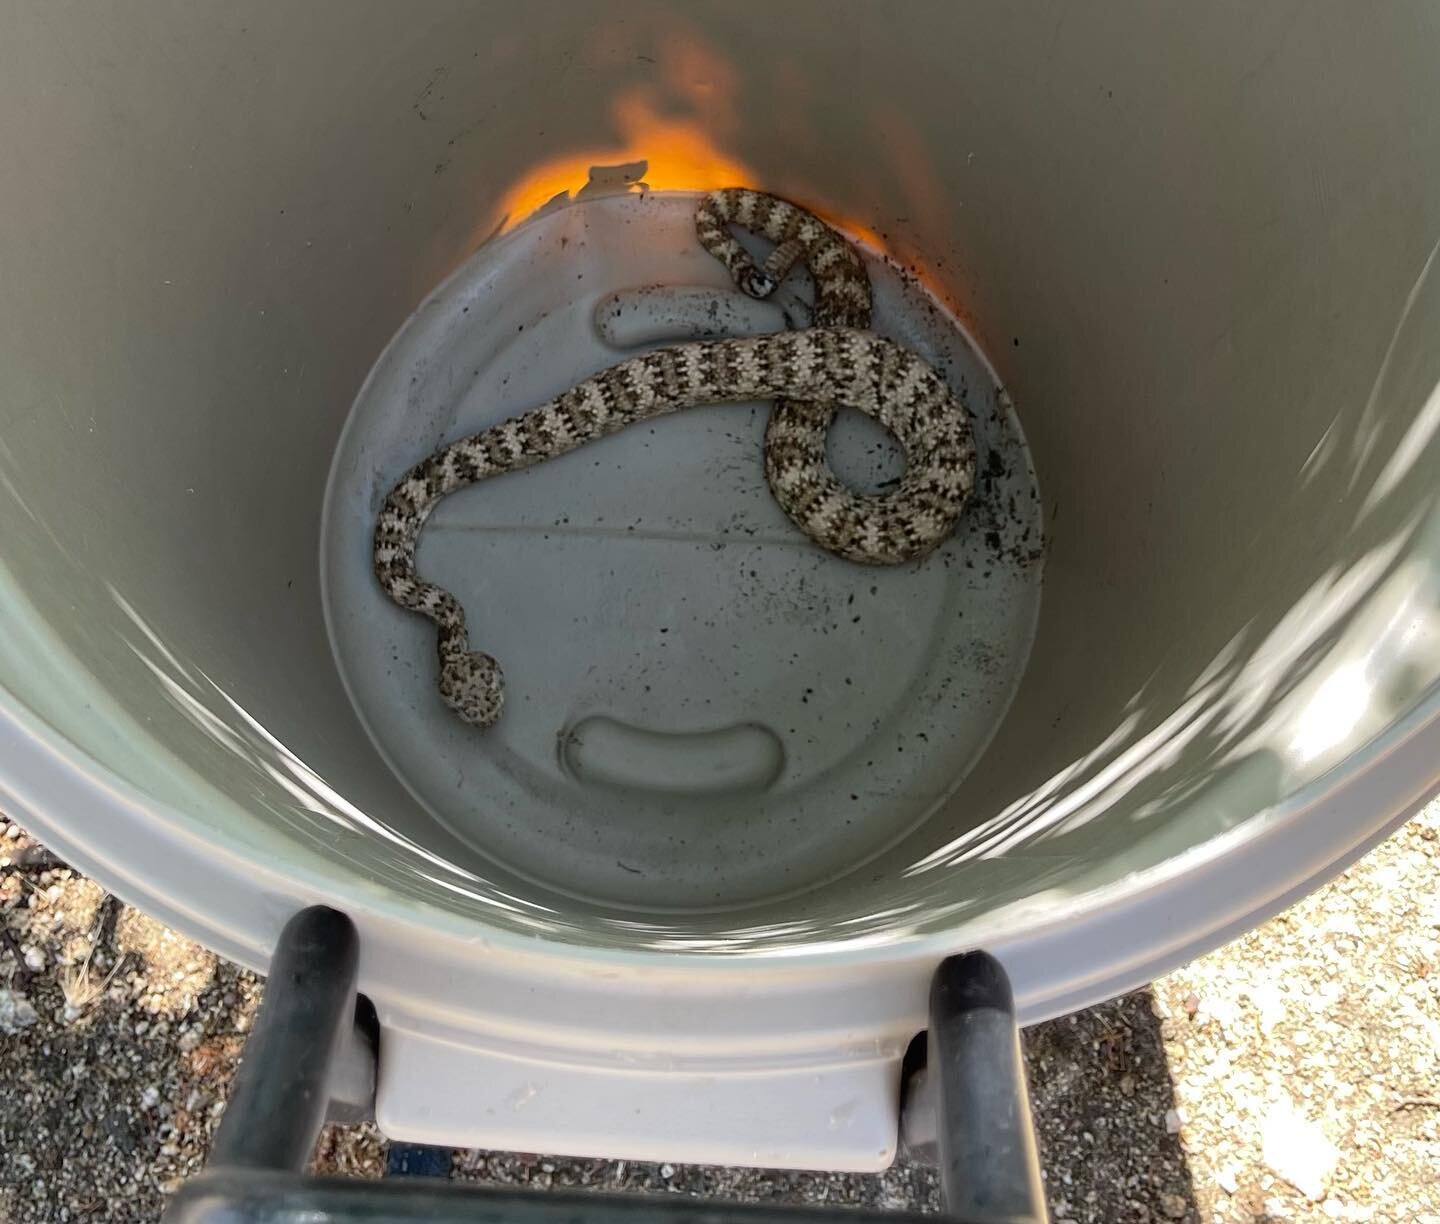 Rattlesnake relocation # 3 already for this season.  This guy never rattled during the capture. Be careful out there, not all of them will give you that handy warning rattle.  #desert #joshuatree #nokill #noharm #desertlife #snakerelocation #besafe #